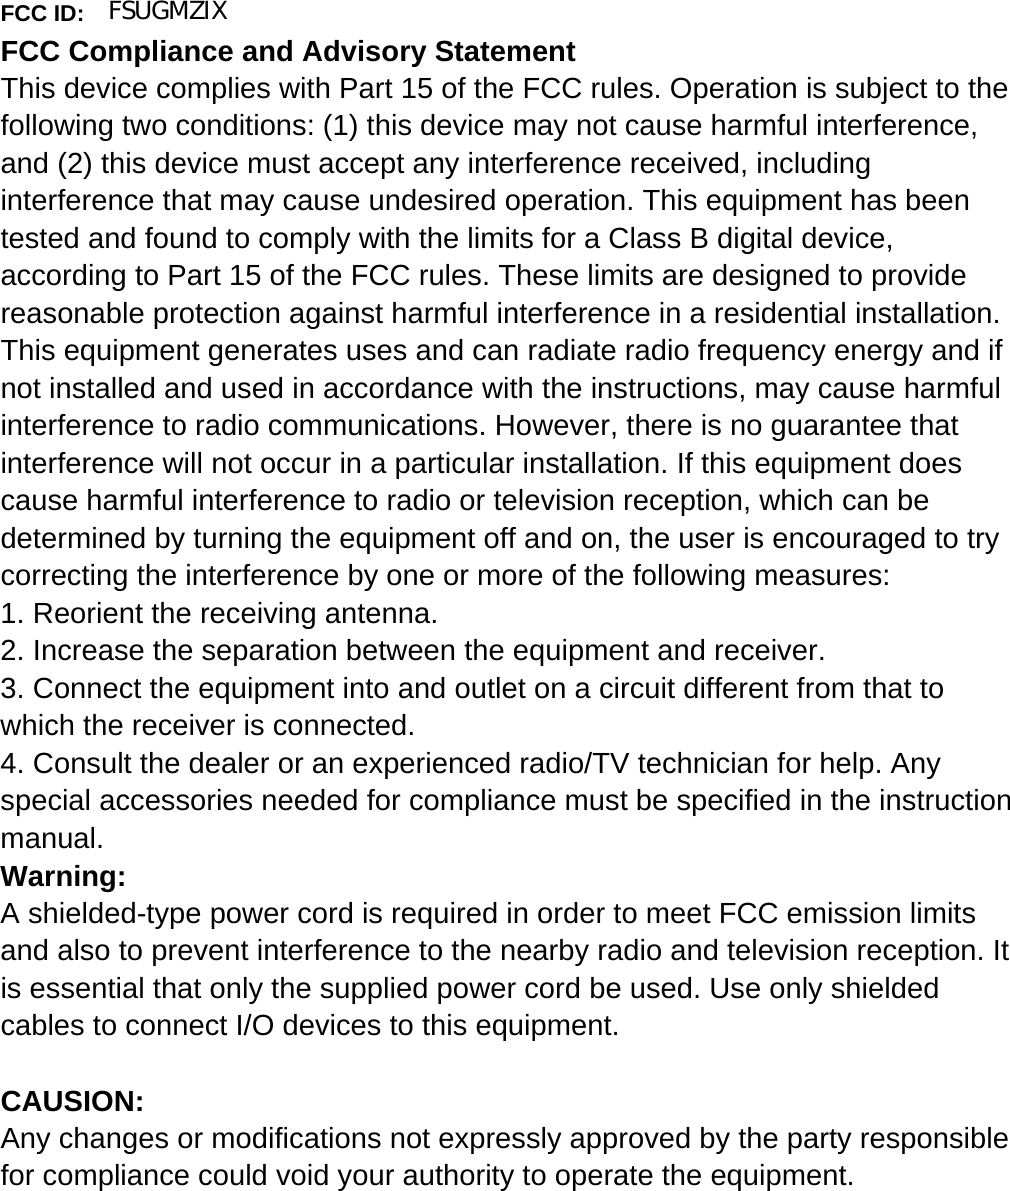   FCC ID: FCC Compliance and Advisory Statement This device complies with Part 15 of the FCC rules. Operation is subject to the following two conditions: (1) this device may not cause harmful interference, and (2) this device must accept any interference received, including interference that may cause undesired operation. This equipment has been tested and found to comply with the limits for a Class B digital device, according to Part 15 of the FCC rules. These limits are designed to provide reasonable protection against harmful interference in a residential installation. This equipment generates uses and can radiate radio frequency energy and if not installed and used in accordance with the instructions, may cause harmful interference to radio communications. However, there is no guarantee that interference will not occur in a particular installation. If this equipment does cause harmful interference to radio or television reception, which can be determined by turning the equipment off and on, the user is encouraged to try correcting the interference by one or more of the following measures:   1. Reorient the receiving antenna. 2. Increase the separation between the equipment and receiver. 3. Connect the equipment into and outlet on a circuit different from that to which the receiver is connected. 4. Consult the dealer or an experienced radio/TV technician for help. Any special accessories needed for compliance must be specified in the instruction manual. Warning: A shielded-type power cord is required in order to meet FCC emission limits and also to prevent interference to the nearby radio and television reception. It is essential that only the supplied power cord be used. Use only shielded cables to connect I/O devices to this equipment.  CAUSION: Any changes or modifications not expressly approved by the party responsible for compliance could void your authority to operate the equipment. FSUGMZIX